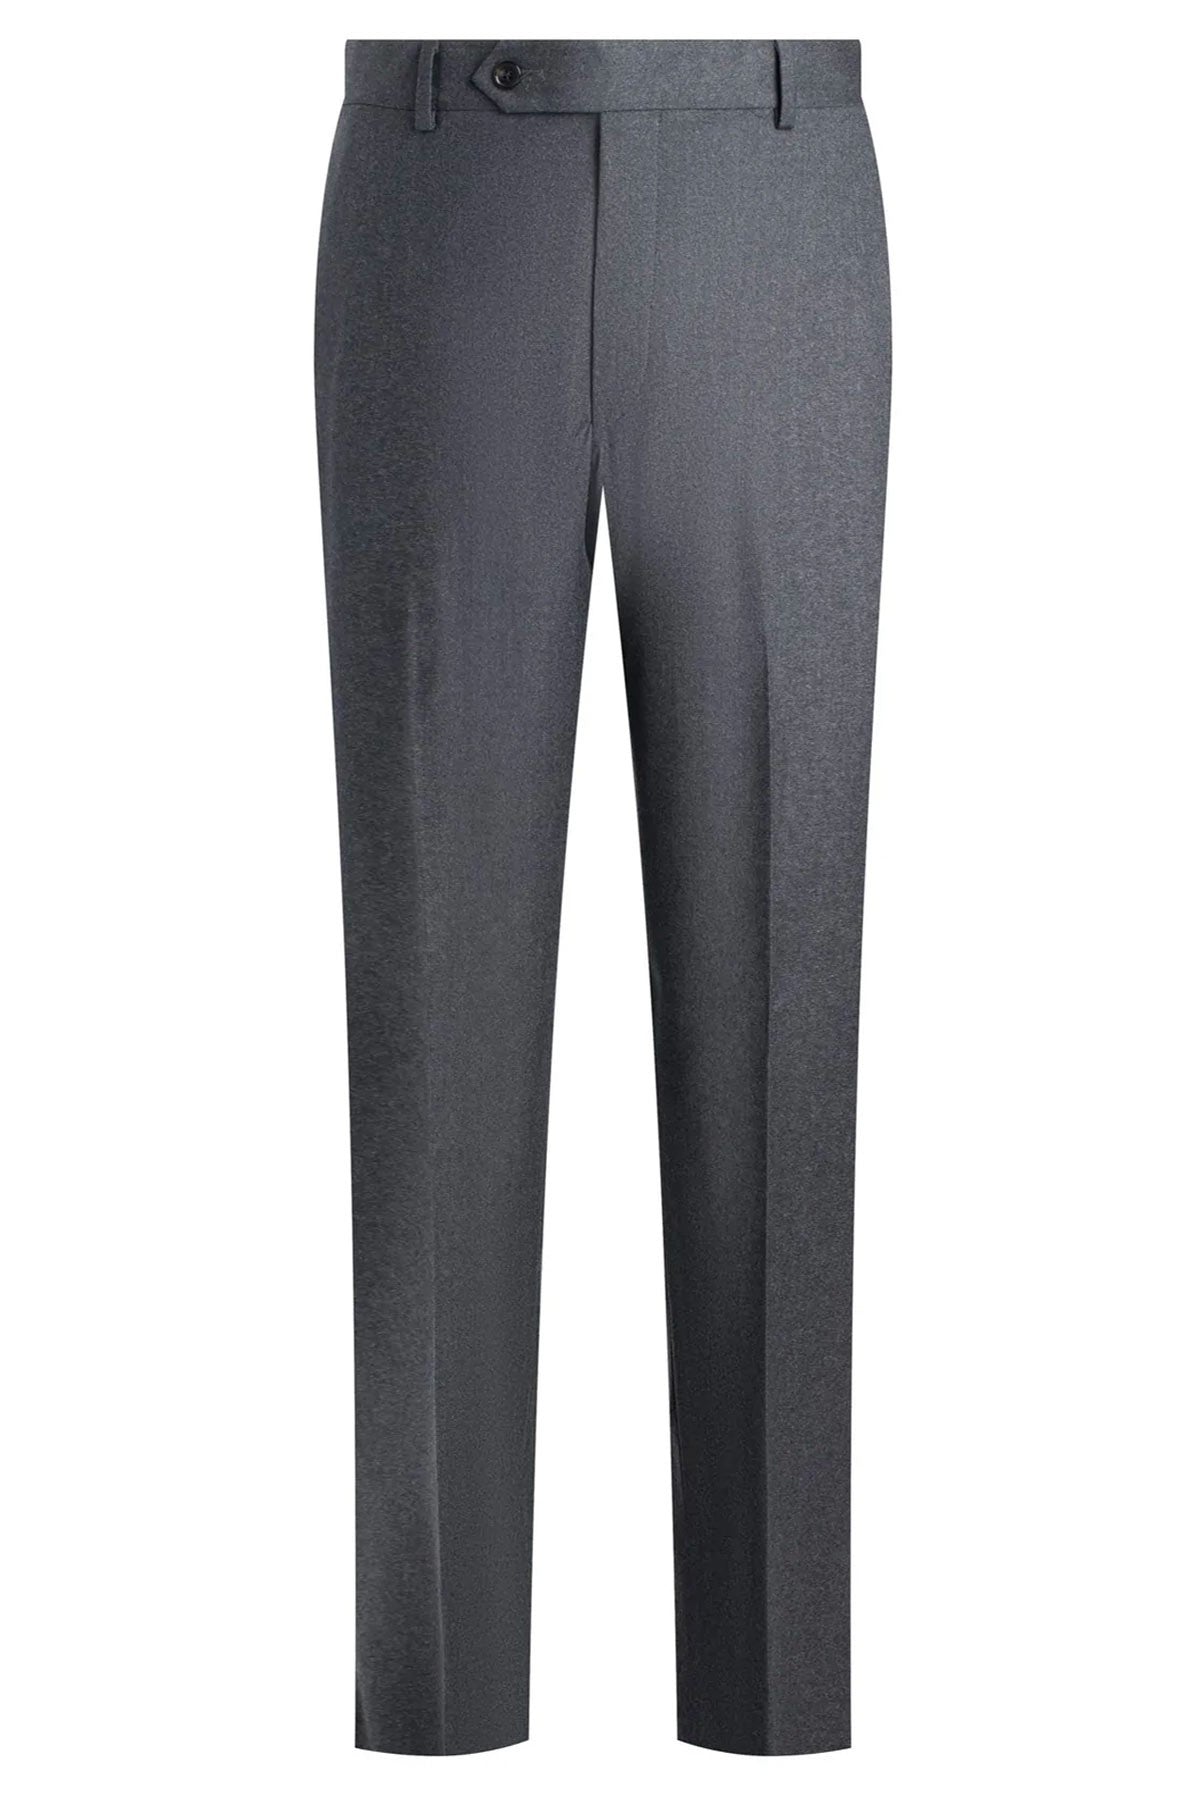 Grey Ice Flannel Flat Front Trousers – Samuelsohn